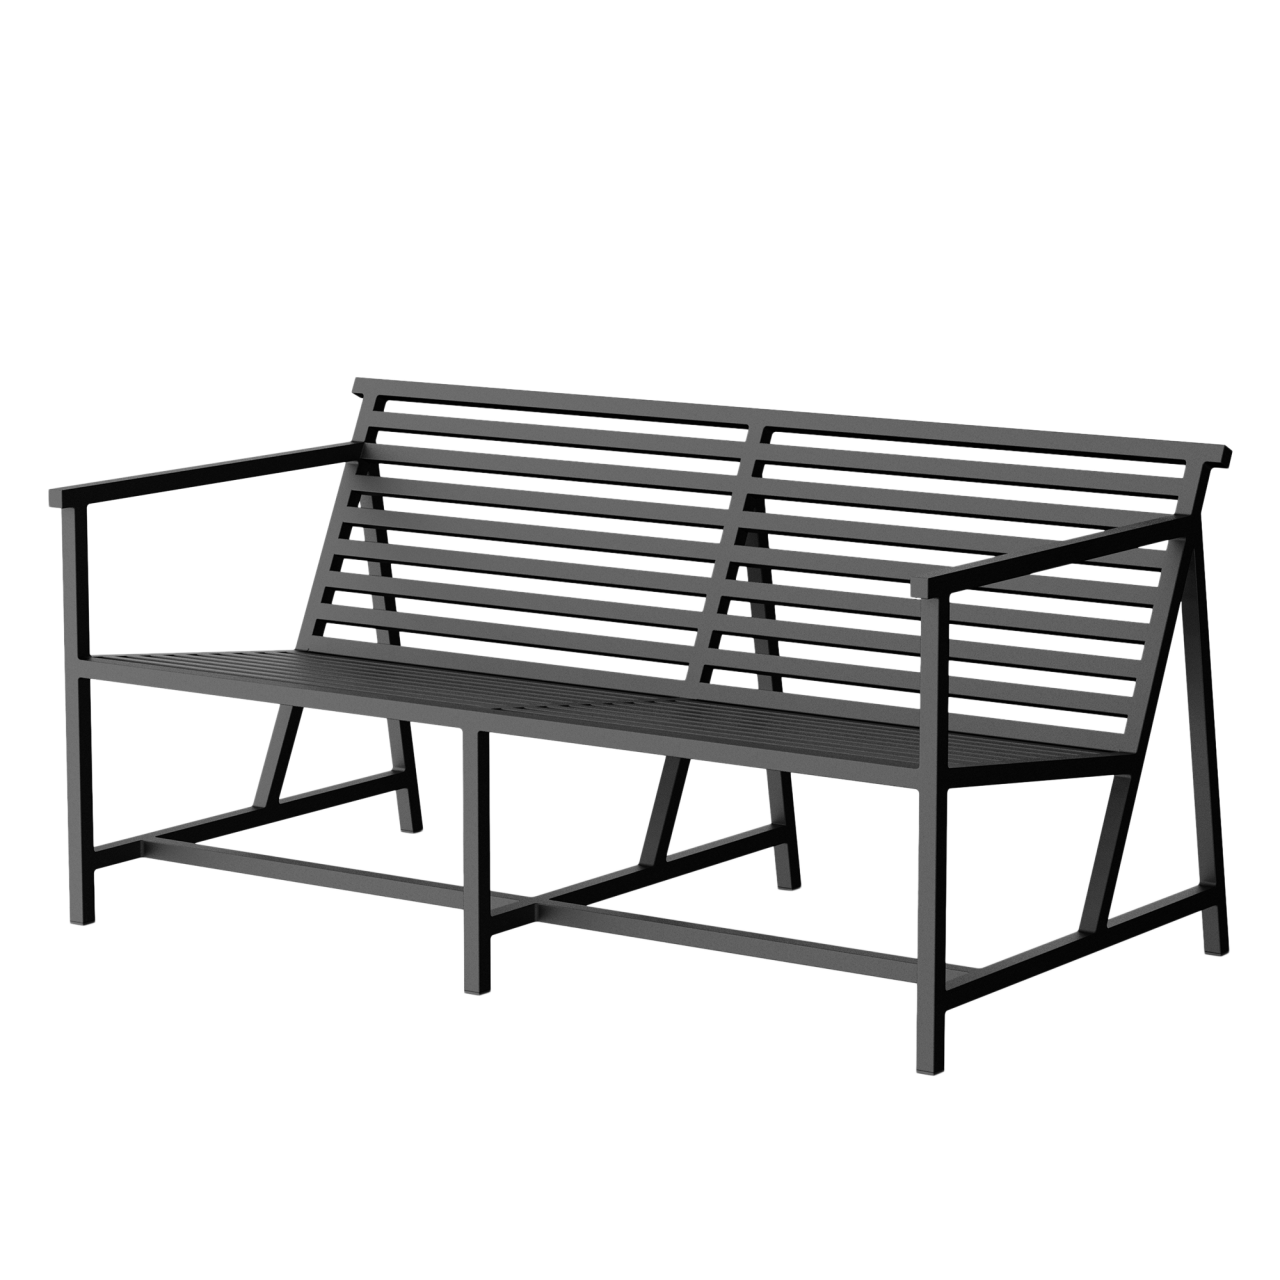 19 Outdoors Lounge Bench Sitzbank